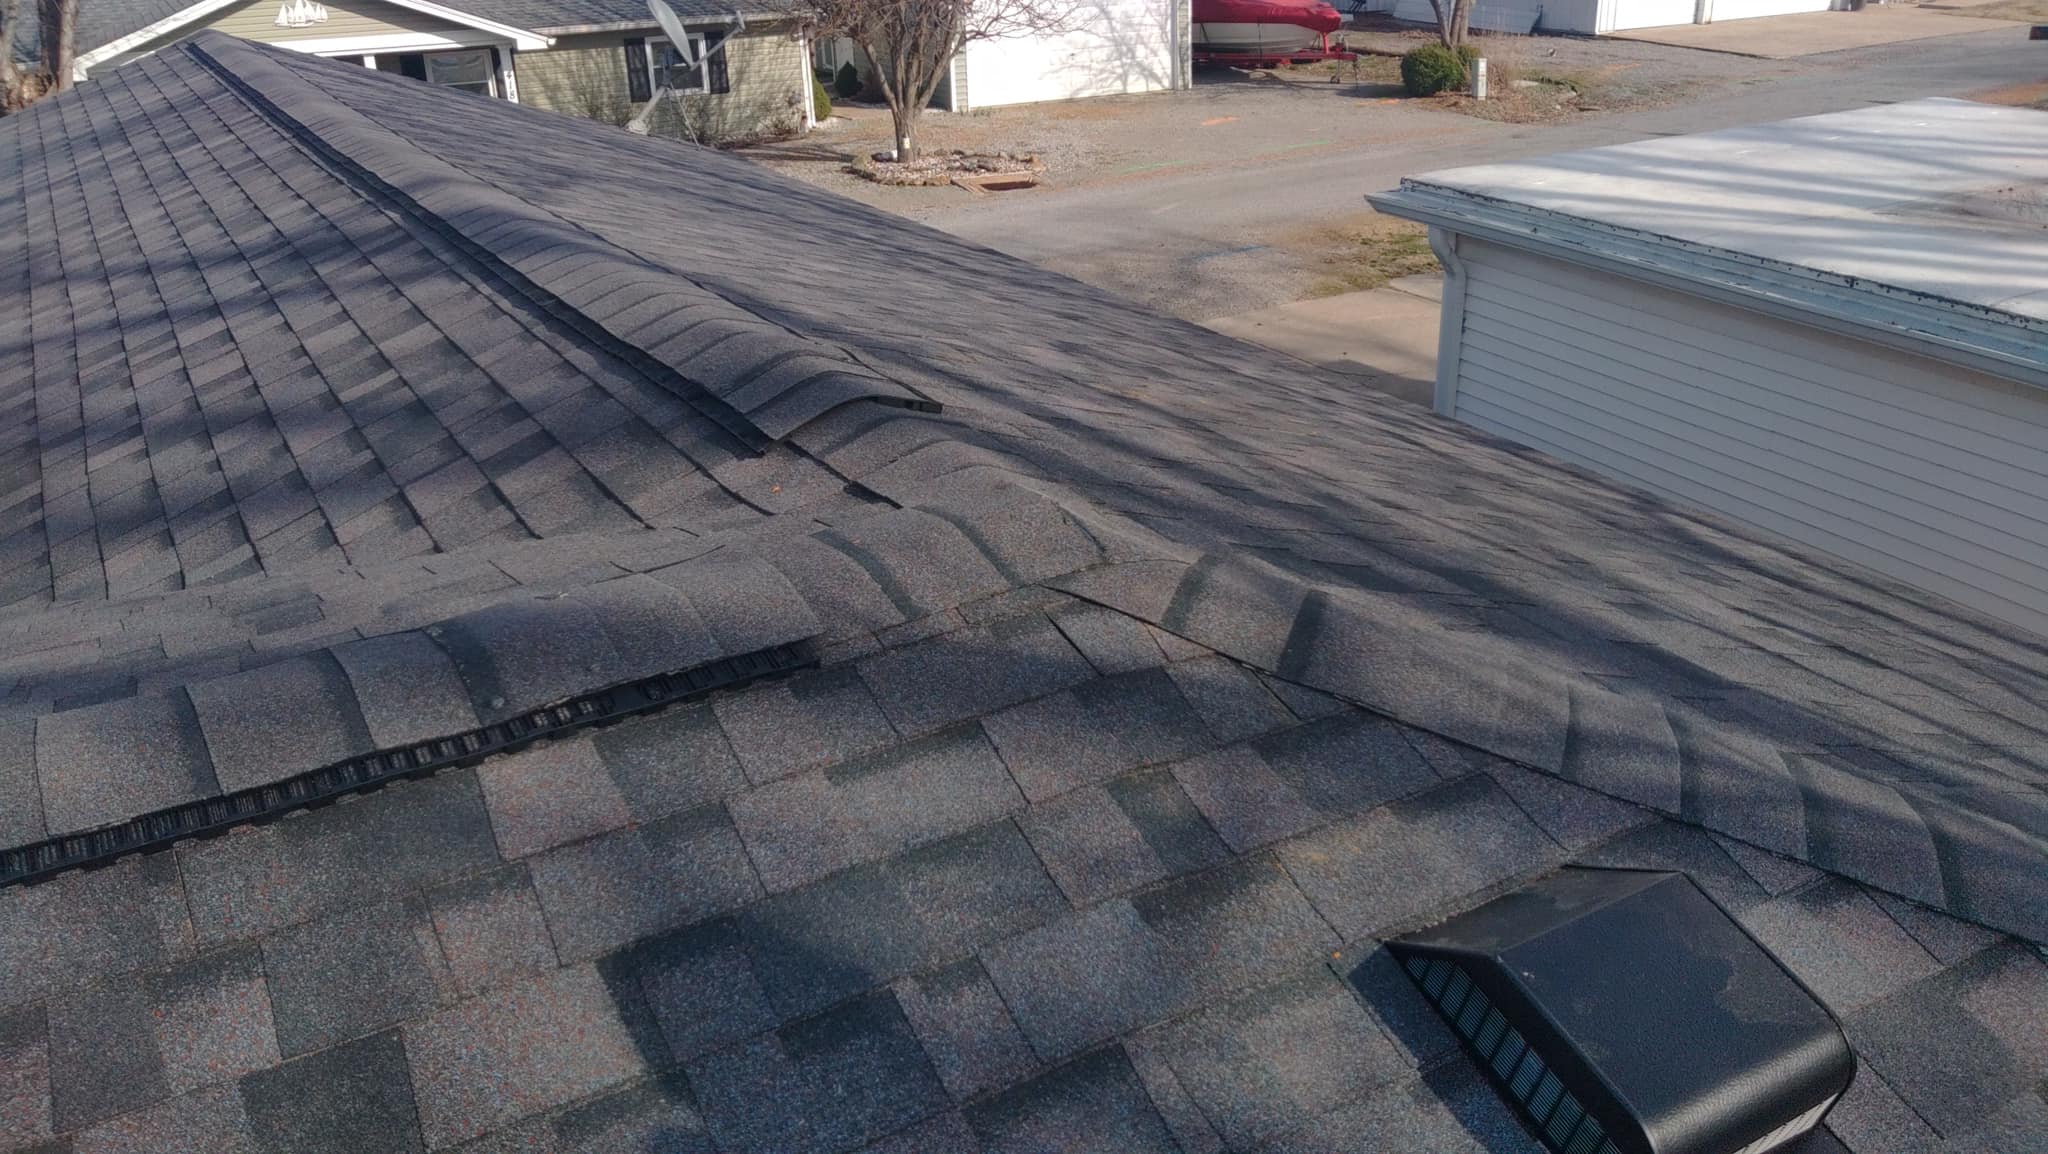 Residential Roof Repair Completed in Marion, IL